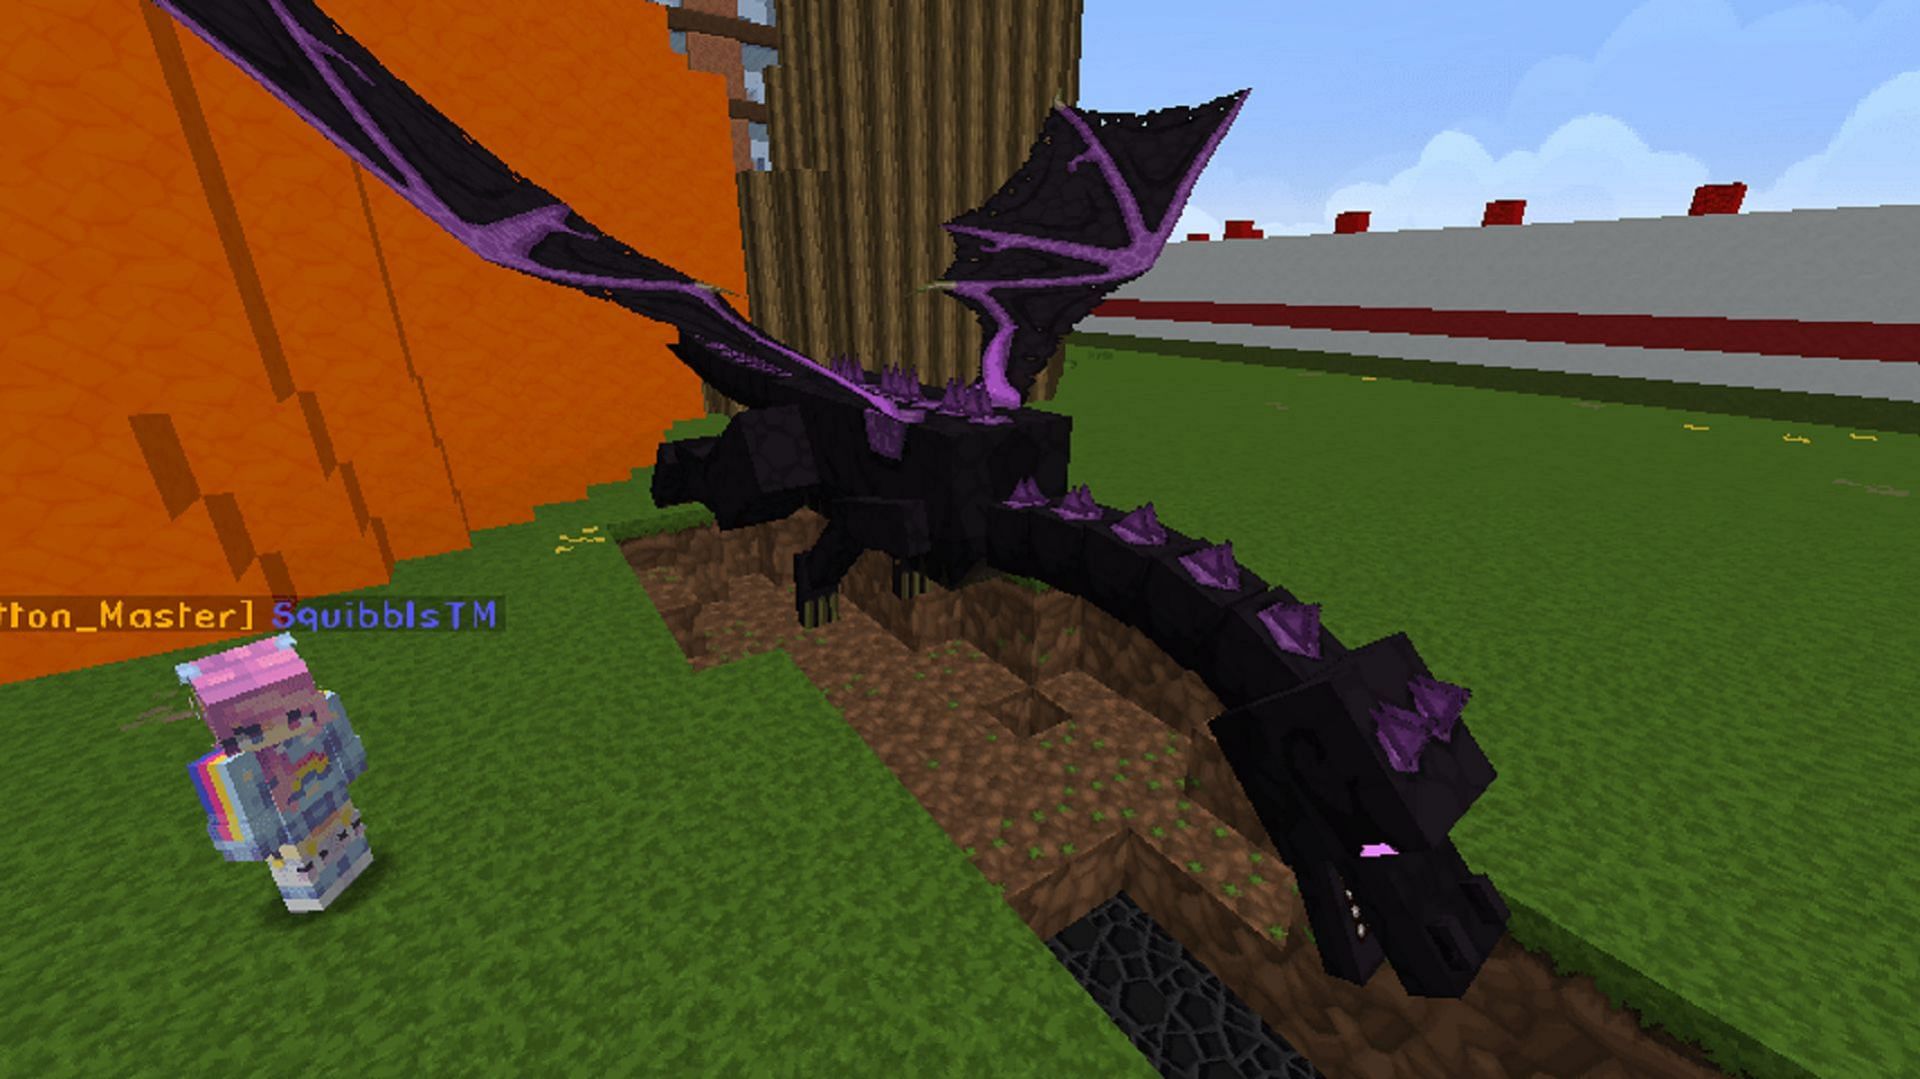 The Ender Dragon and other mobs can now be spawned through the use of spawn eggs (Image via Mojang)